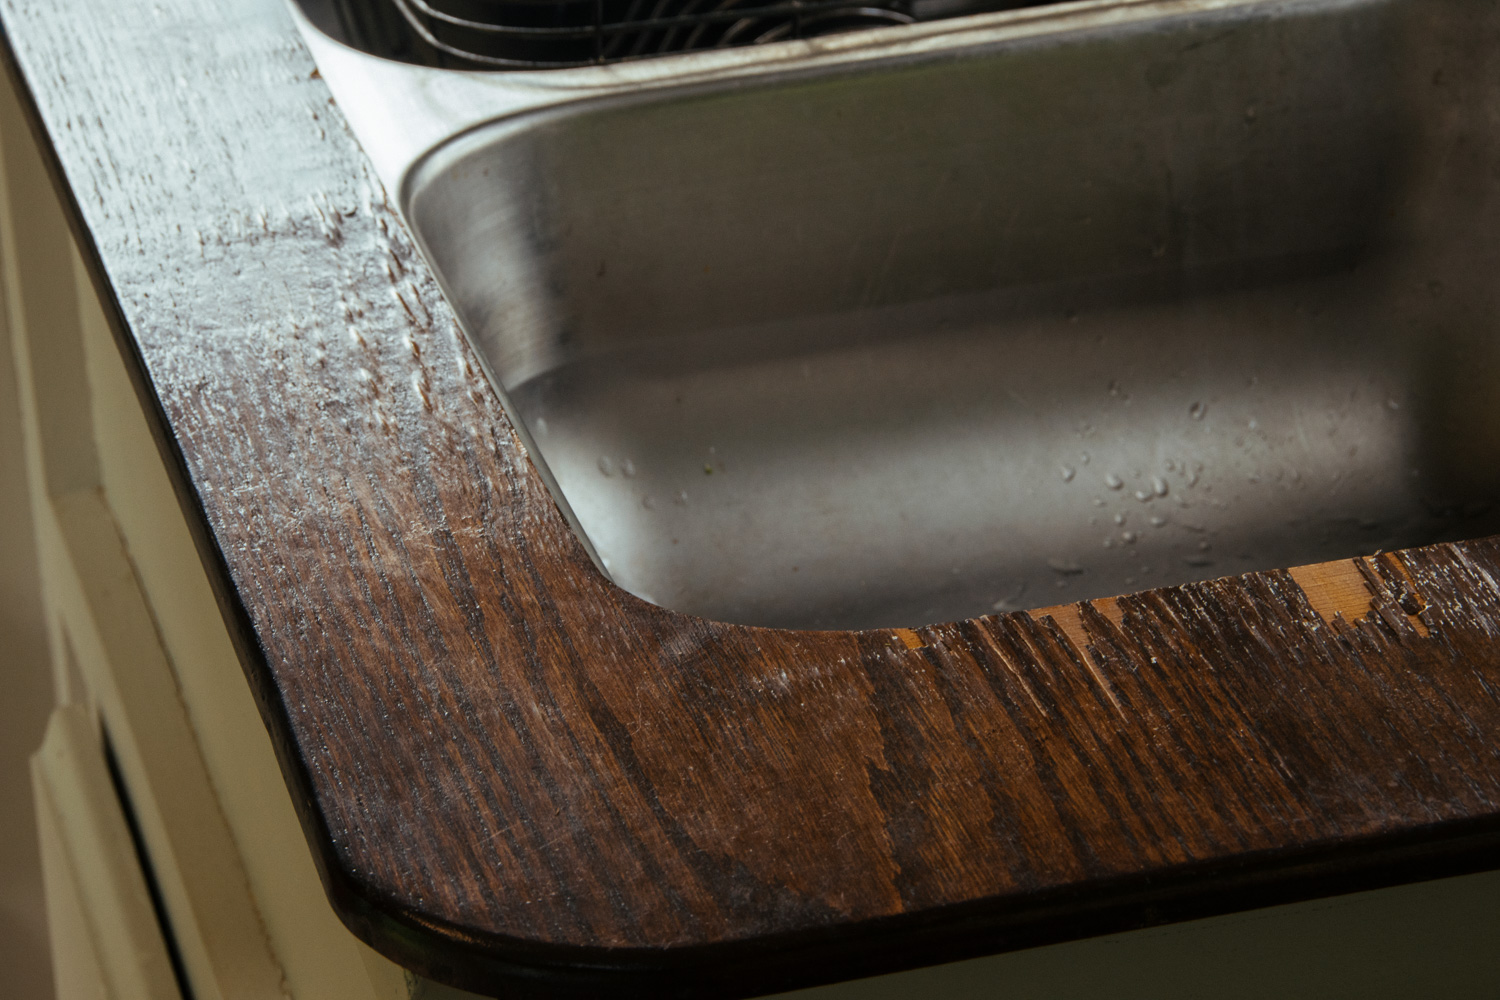  Our kitchen countertops had not weathered well. During the summer of 2017, we decided to sand them down and refinish them. 